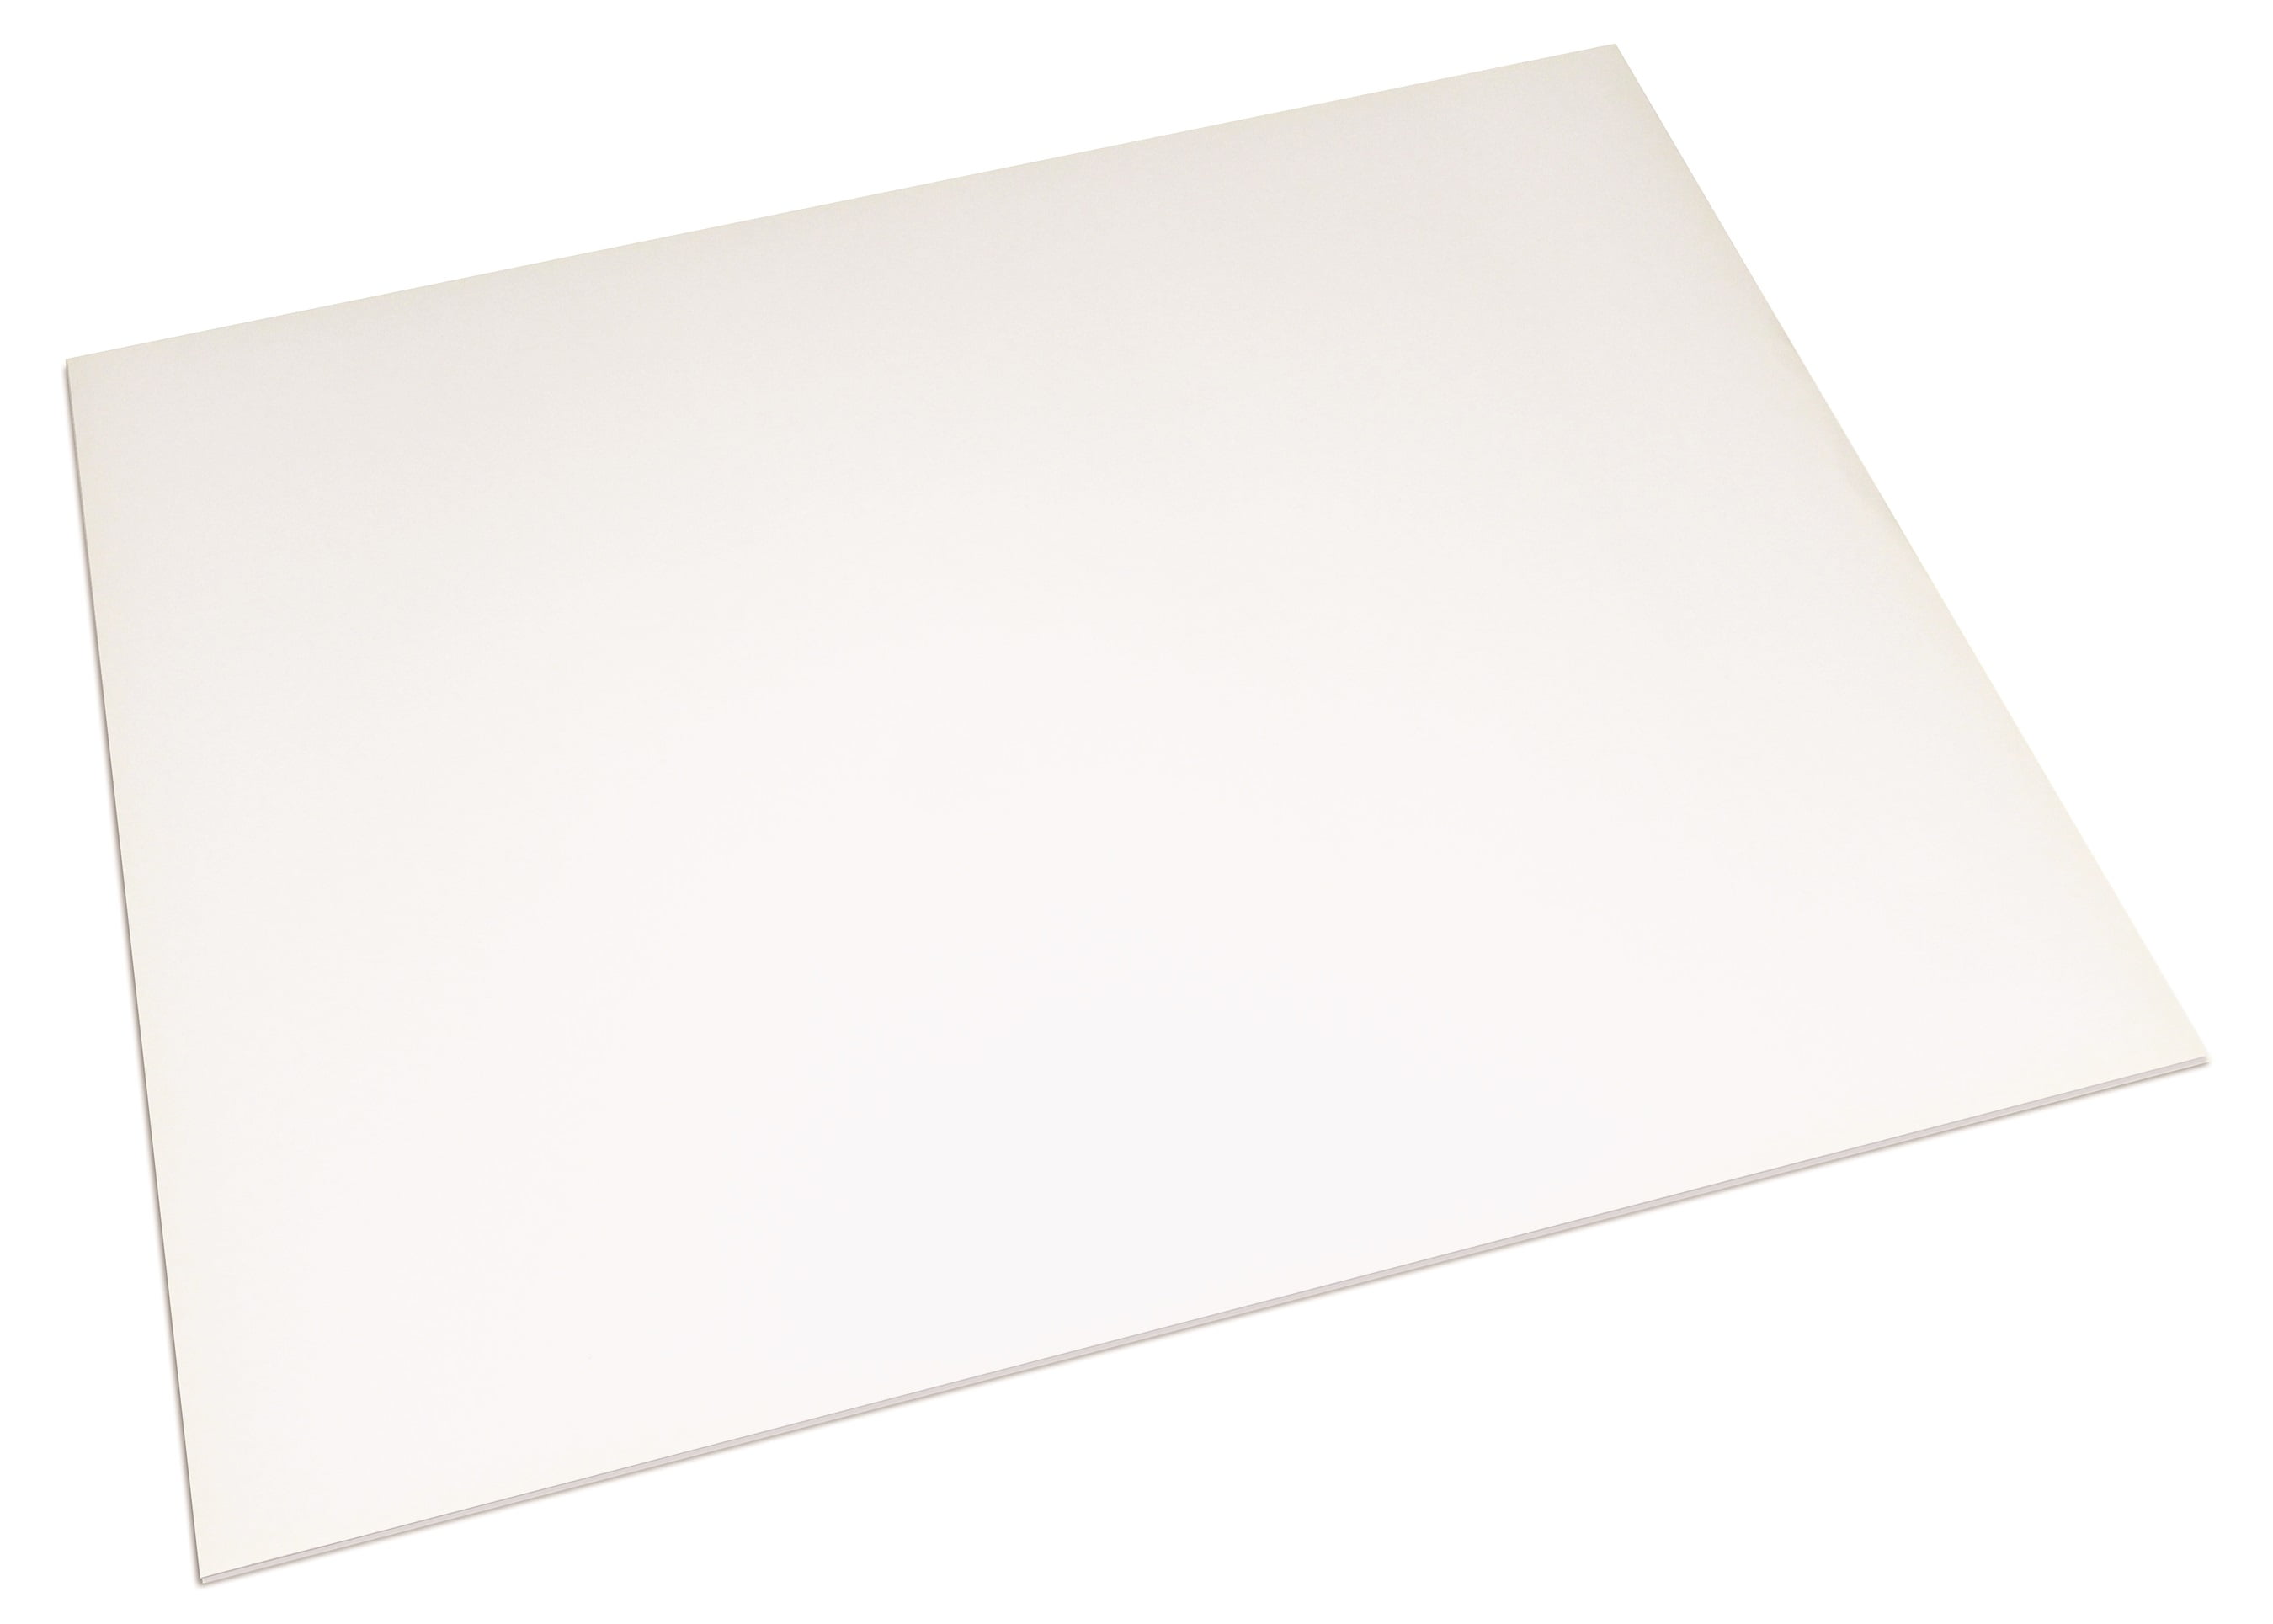 Excelsis Design 15 Pack Foam Board 20x24 Inches | White Foam Board 1/8 inch Thick White Core Mat | Backing Board for Presentations, Signboards, Arts